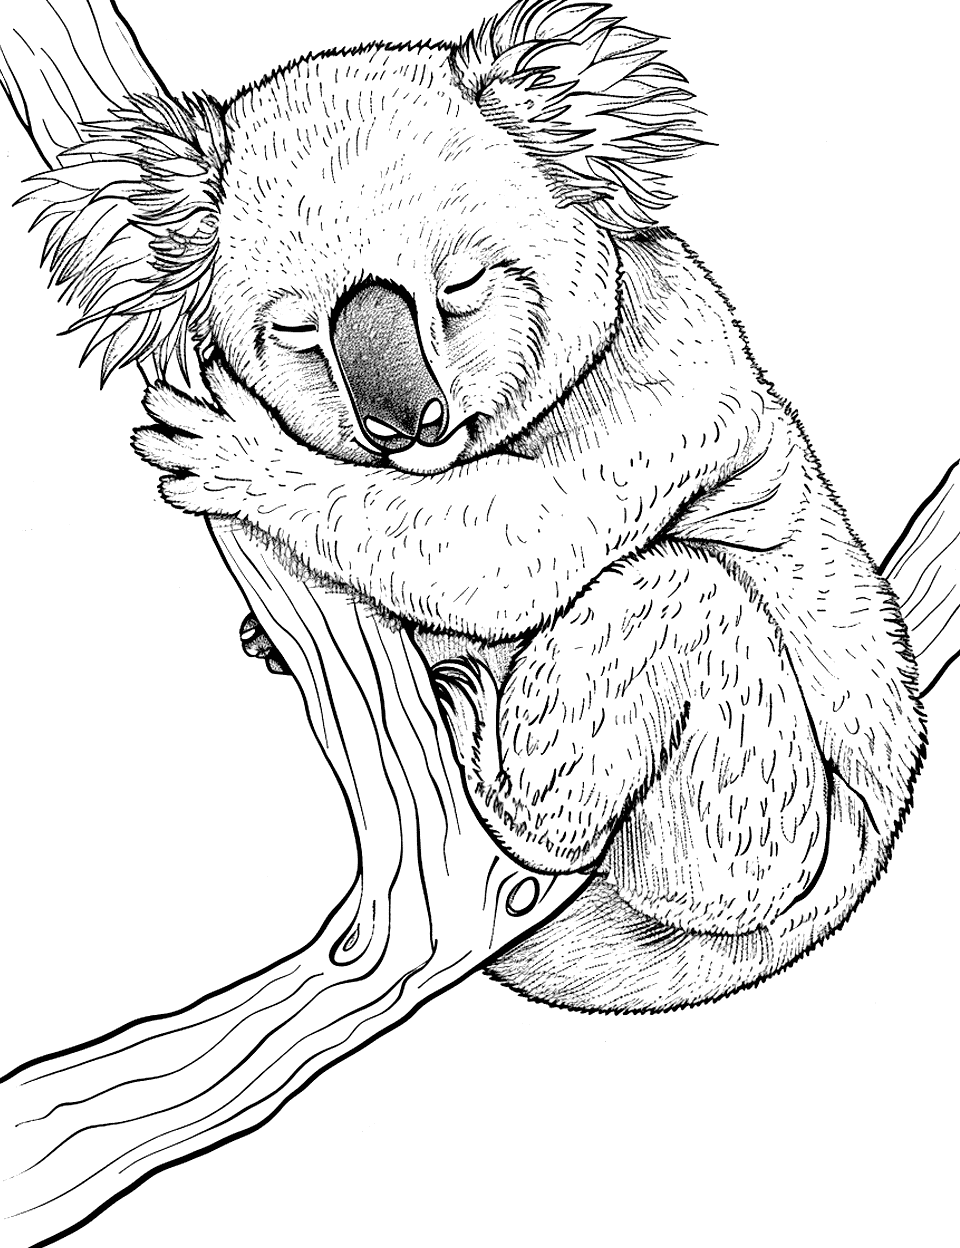 Koala Sleeping Peacefully Coloring Page - A koala asleep on a branch, with its head resting between its paws.